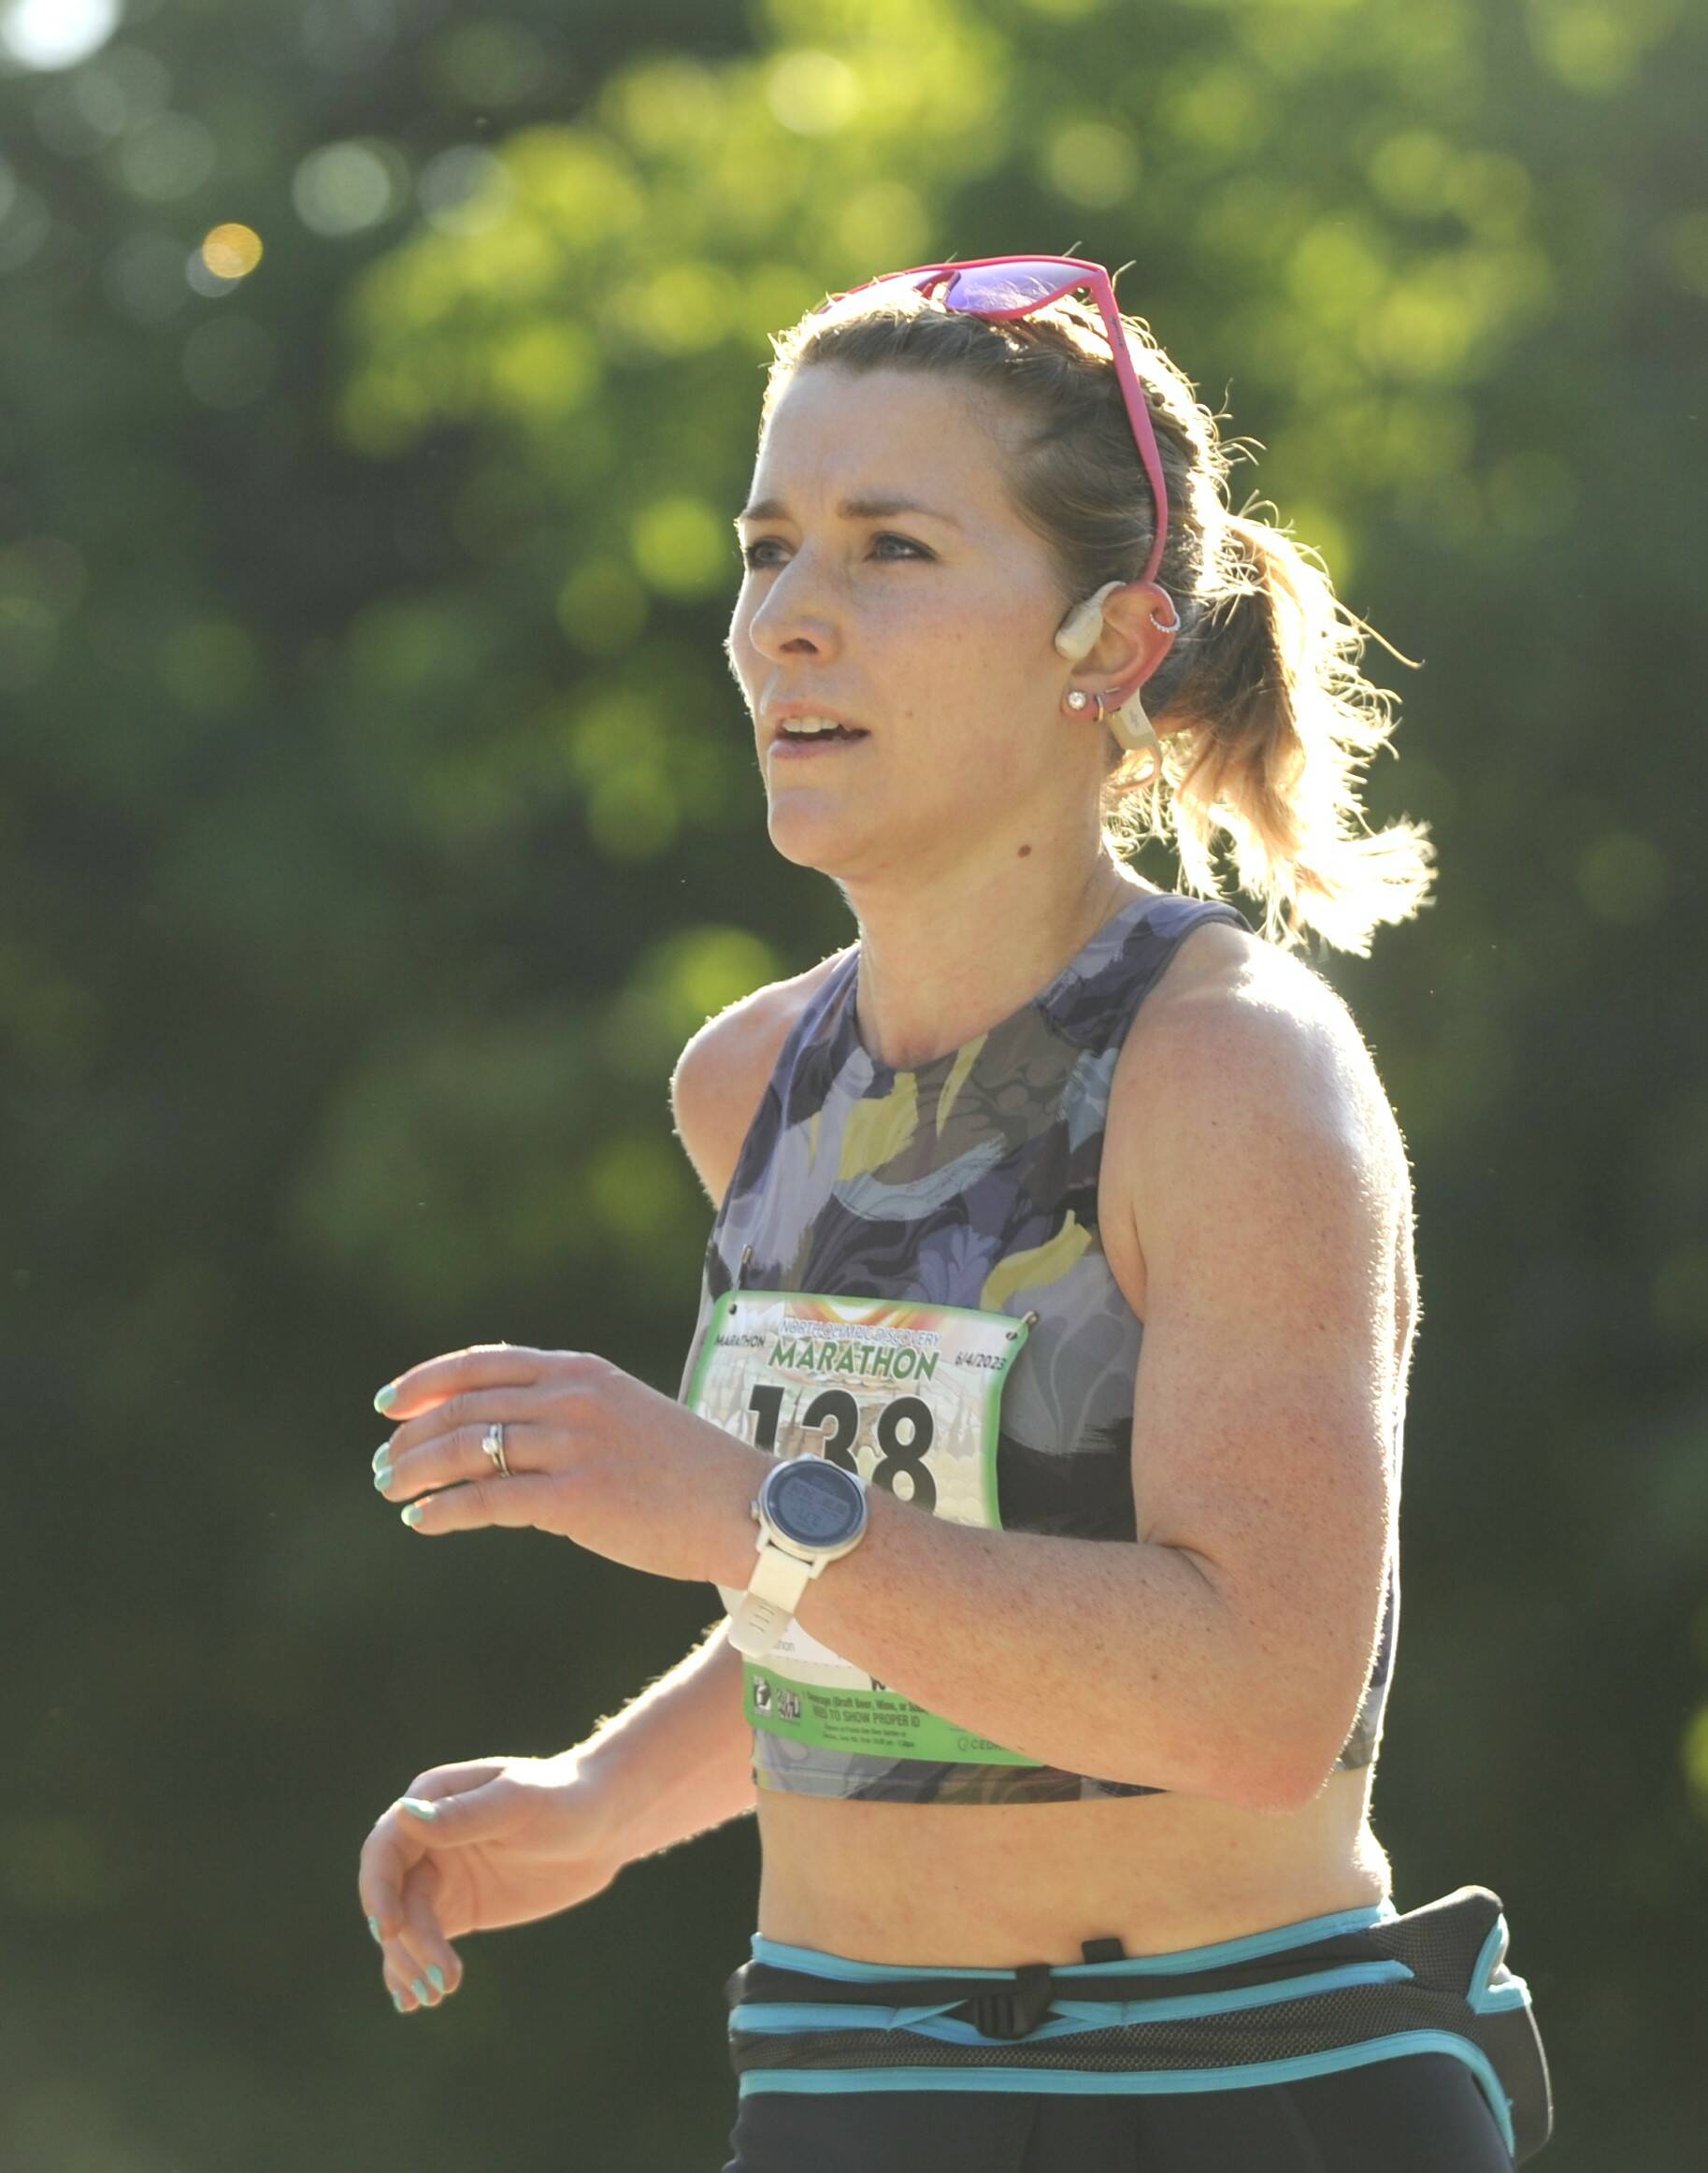 Sara King of Seattle grabs an early lead in the North Olympic Discovery Marathon on June 4. King won the women’s division of the full marathon and was seventh overall, finishing in 3 hours, 12 minutes, 16 seconds.